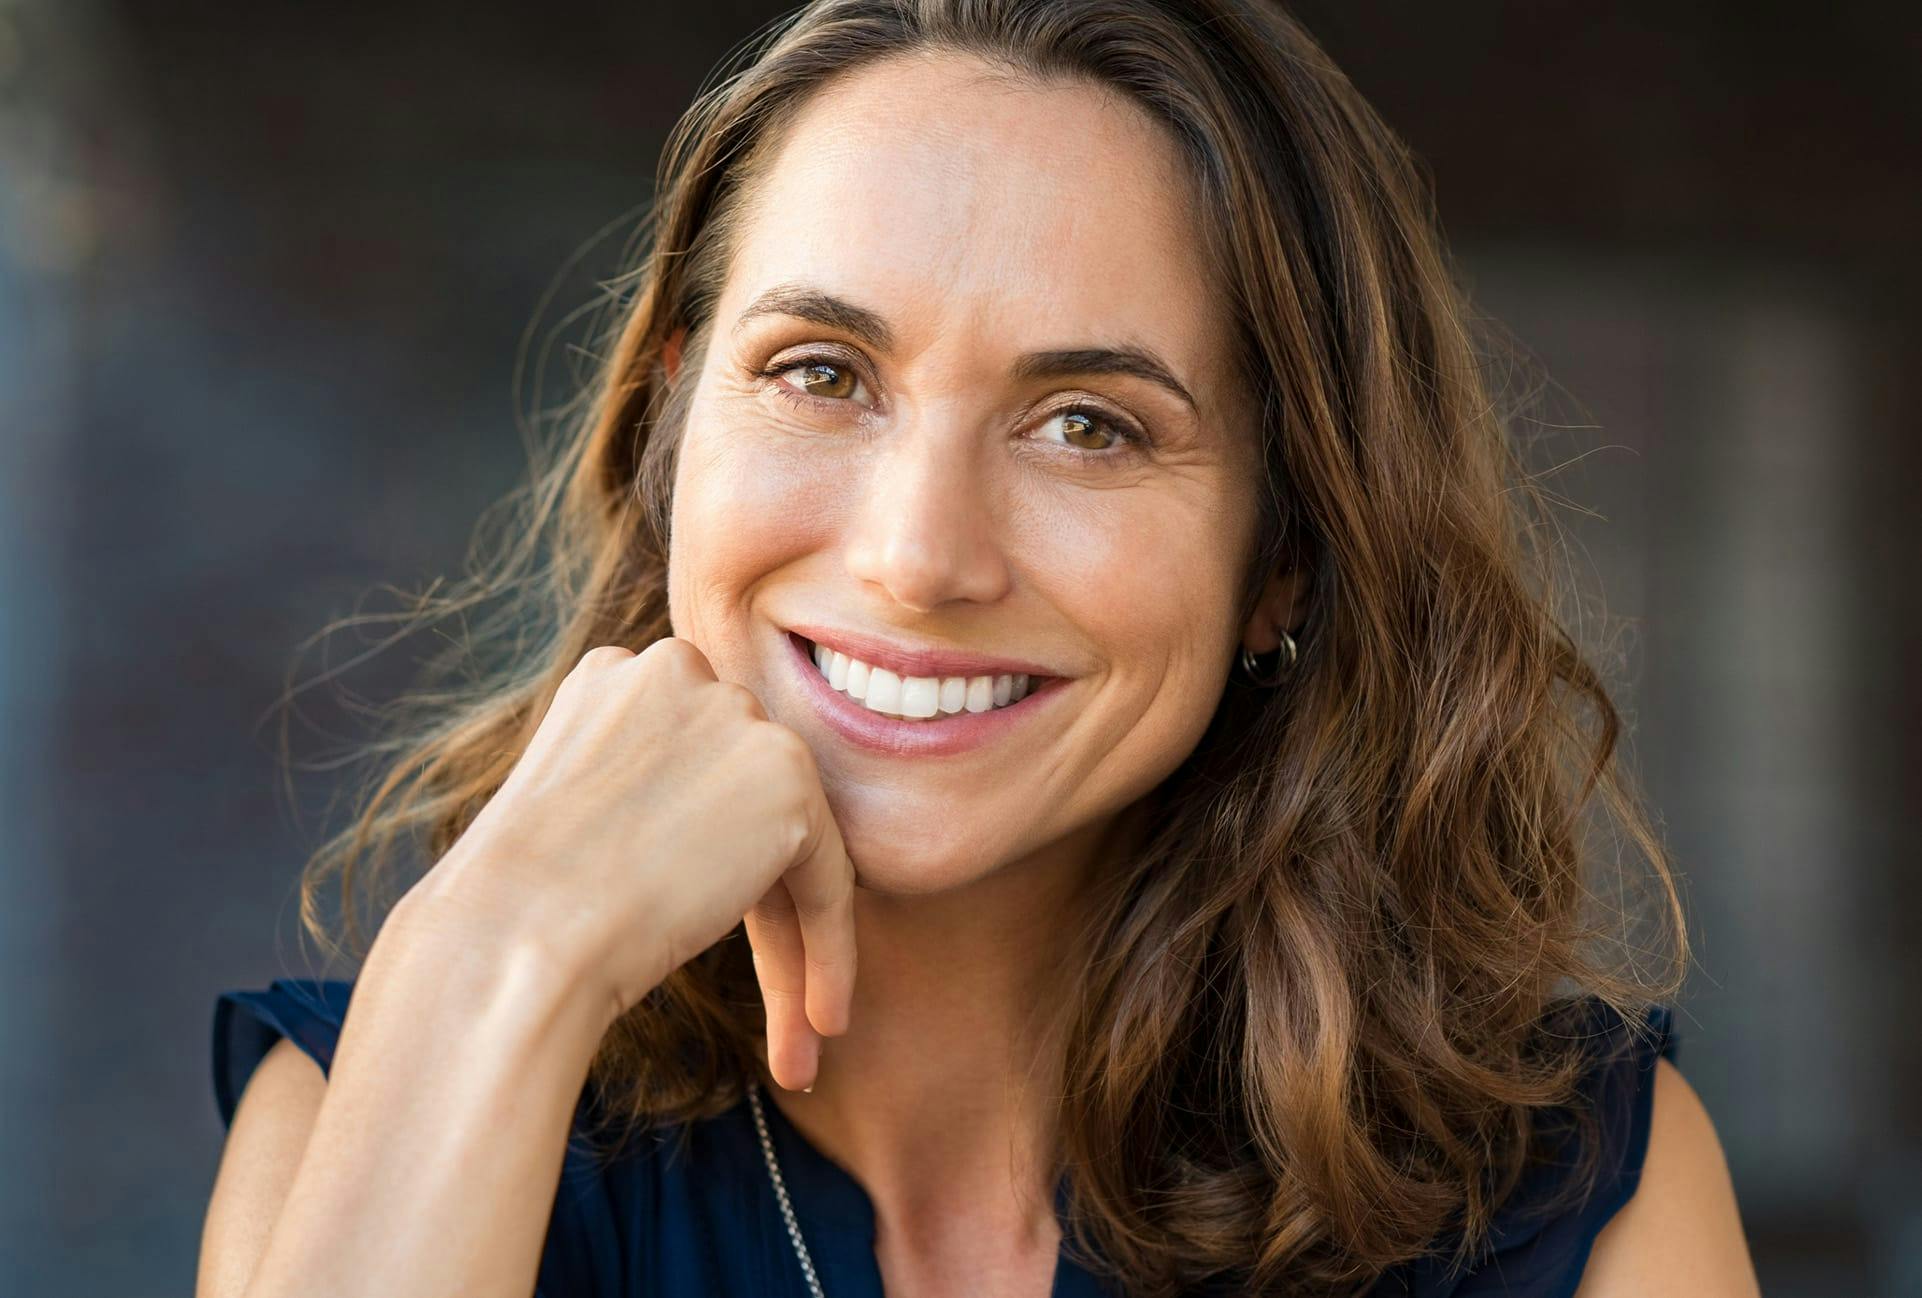 Woman smiling at camera with hand on chin